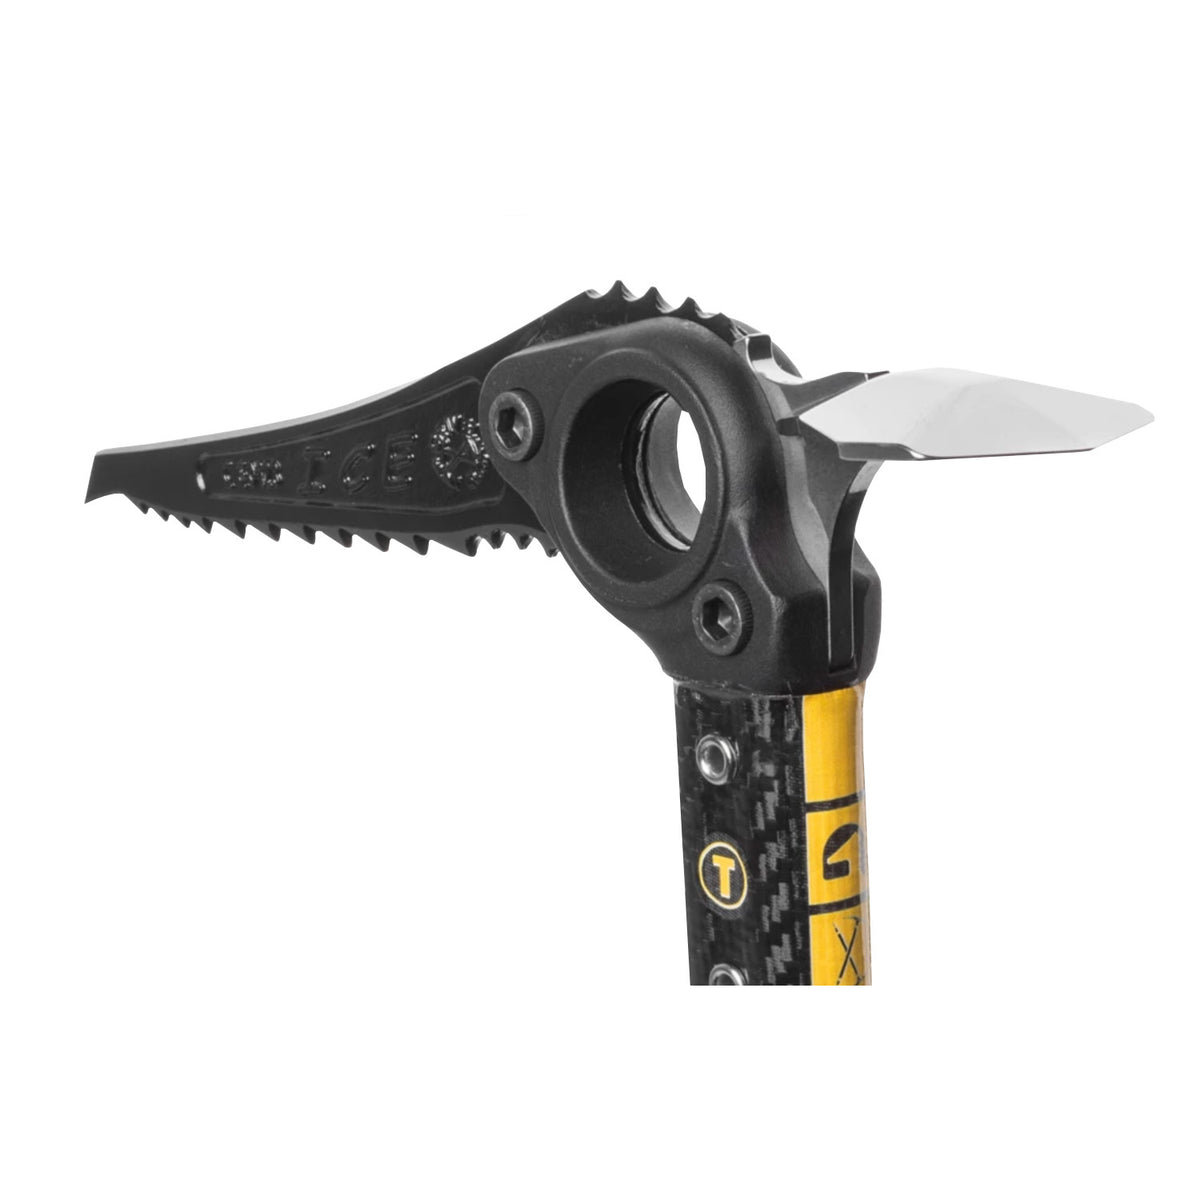 Grivel Adze Vario shown attached to black and yellow Grivel Ice Axe